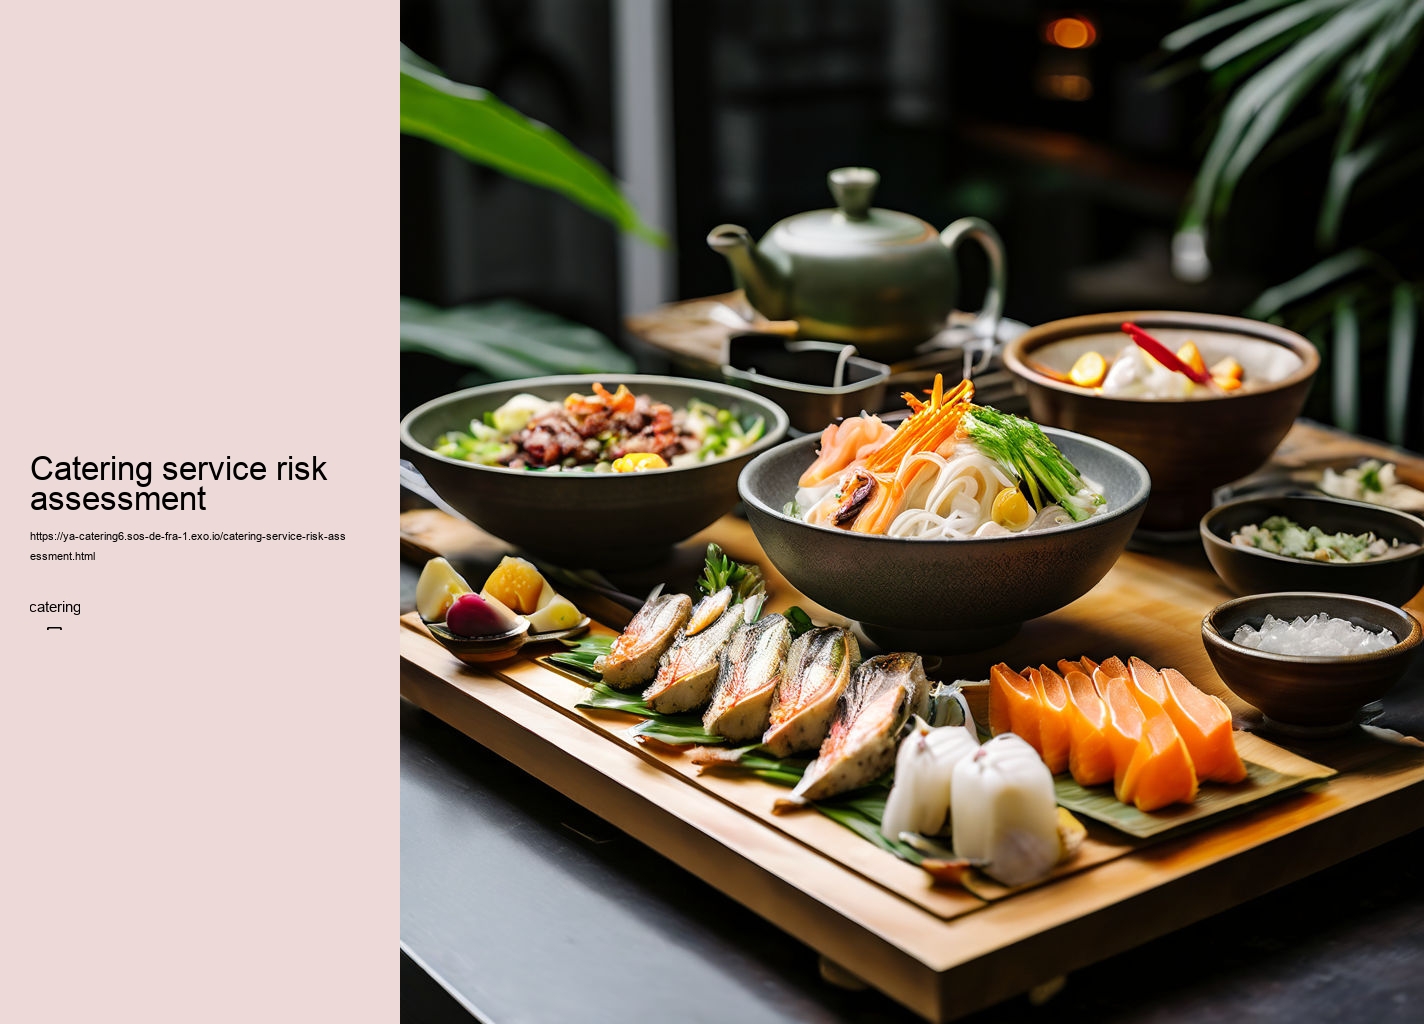 Catering service risk assessment